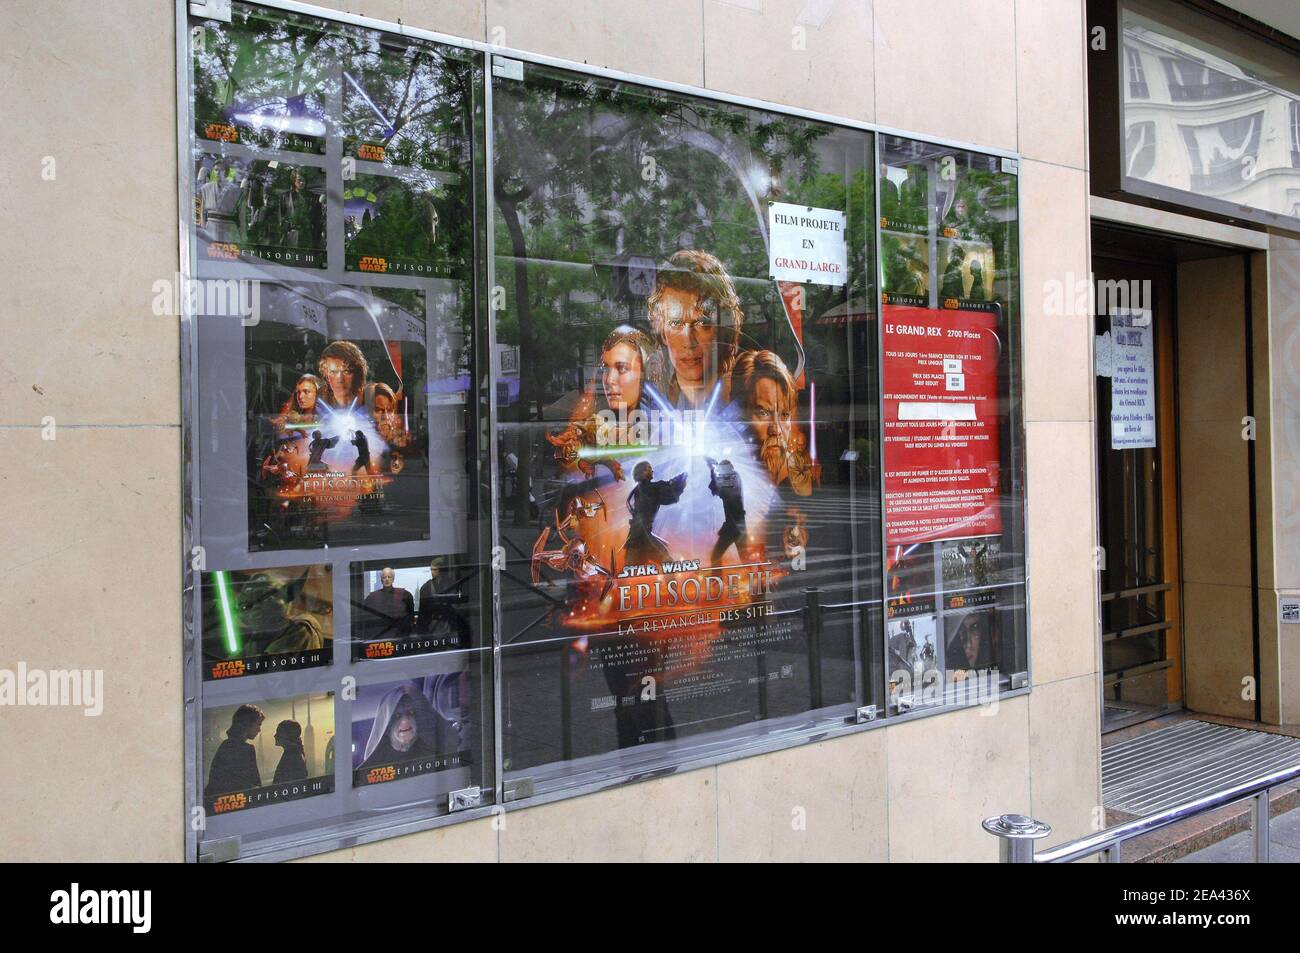 Poster of George Lucas film 'Star Wars Episode 3 Revenge of the Sith' pictured in Paris, France, on May 16, 2005. Photo by Giancarlo Gorassini/ABACA Stock Photo